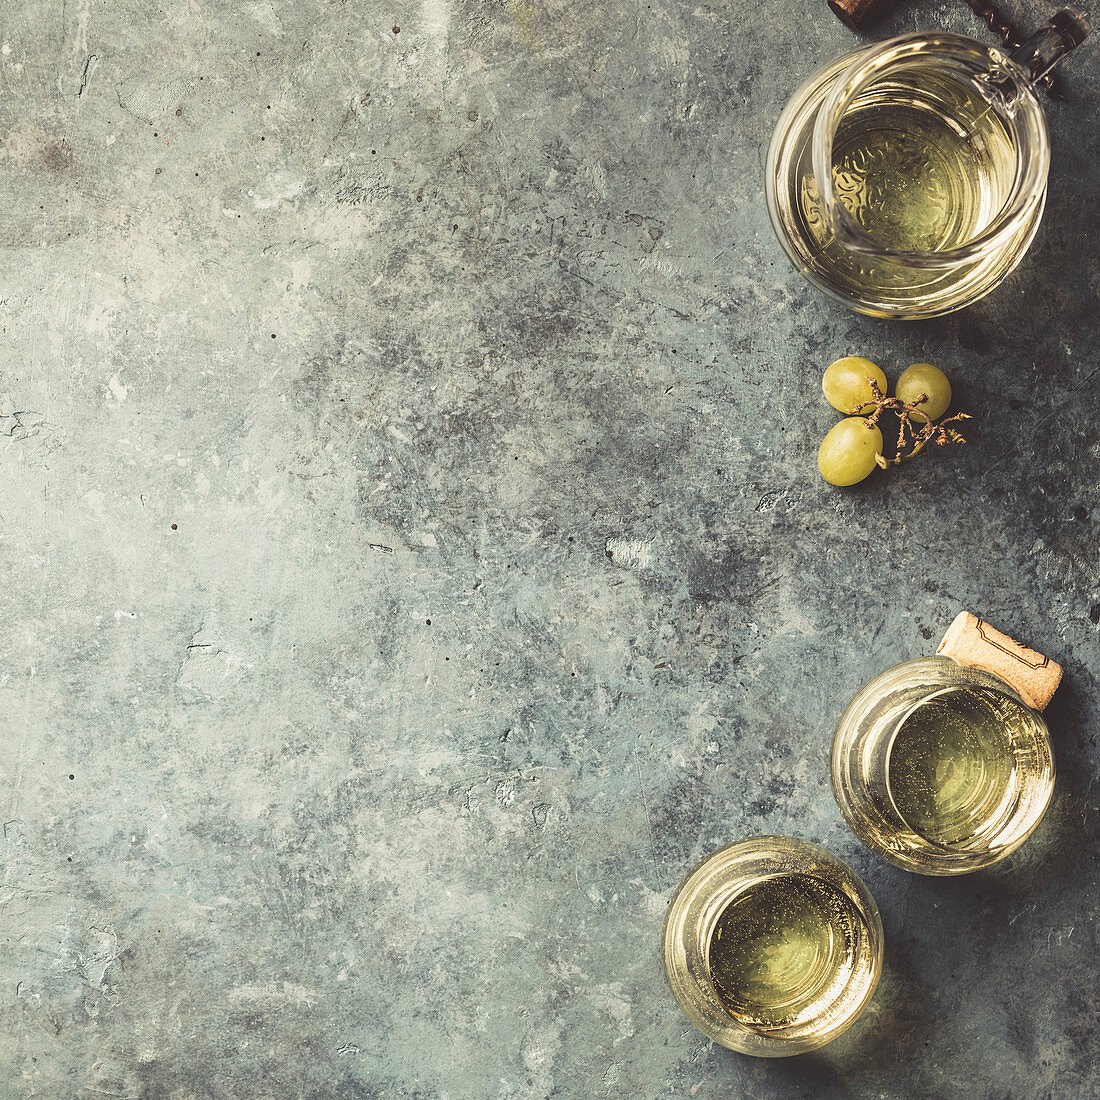 Glasses of white wine on rustic background